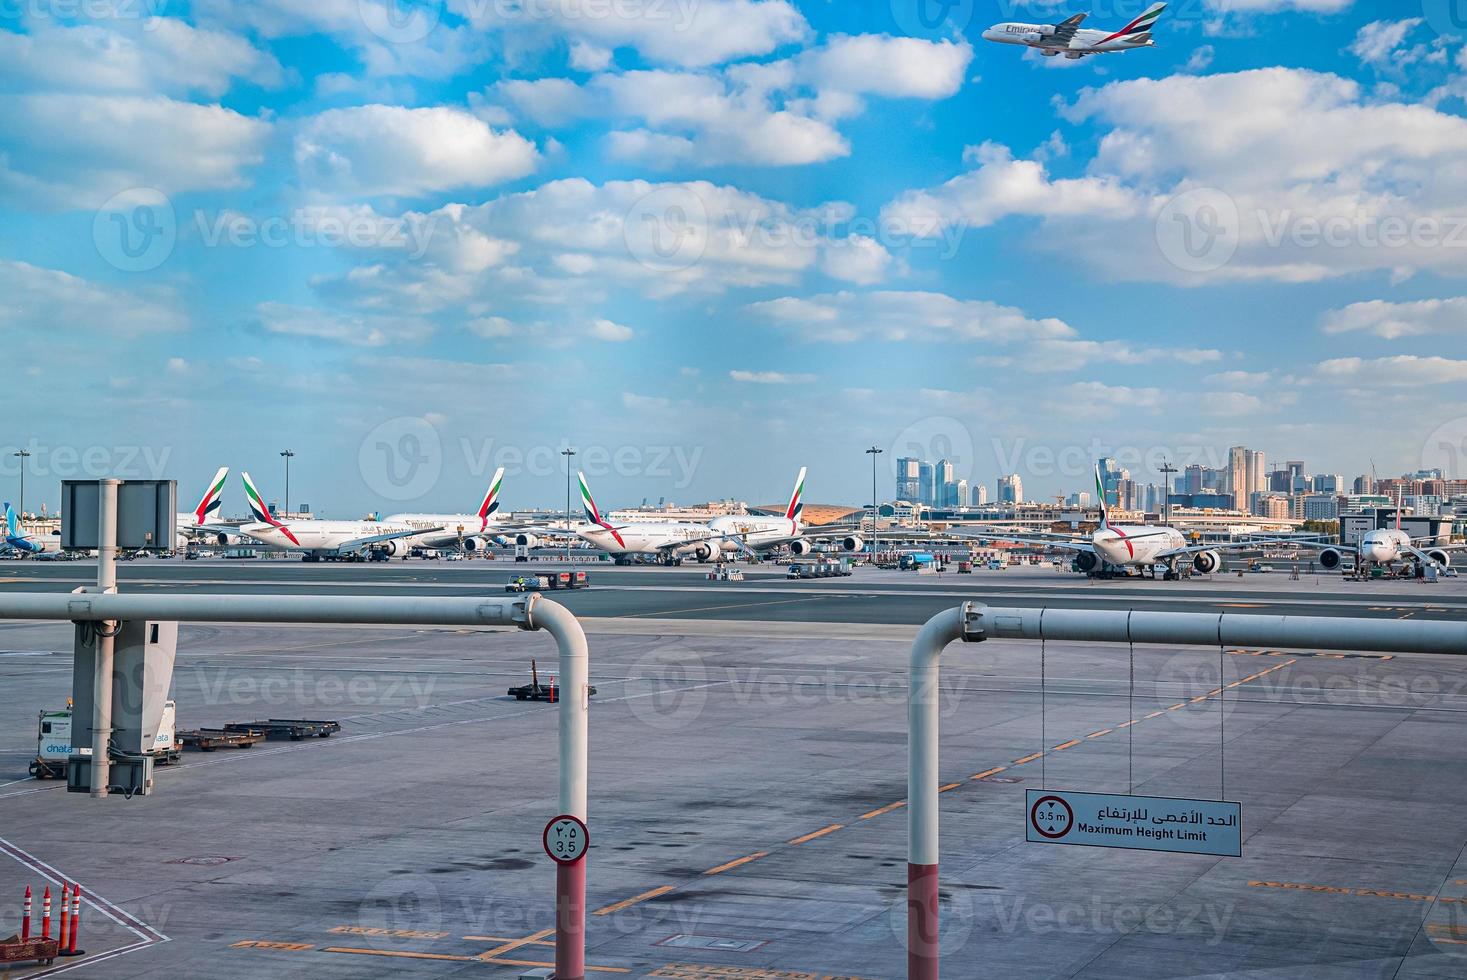 Emirate Airlines A330s, 777s and A380s line up at Terminal 1 in Dubai International Airport DXB. photo